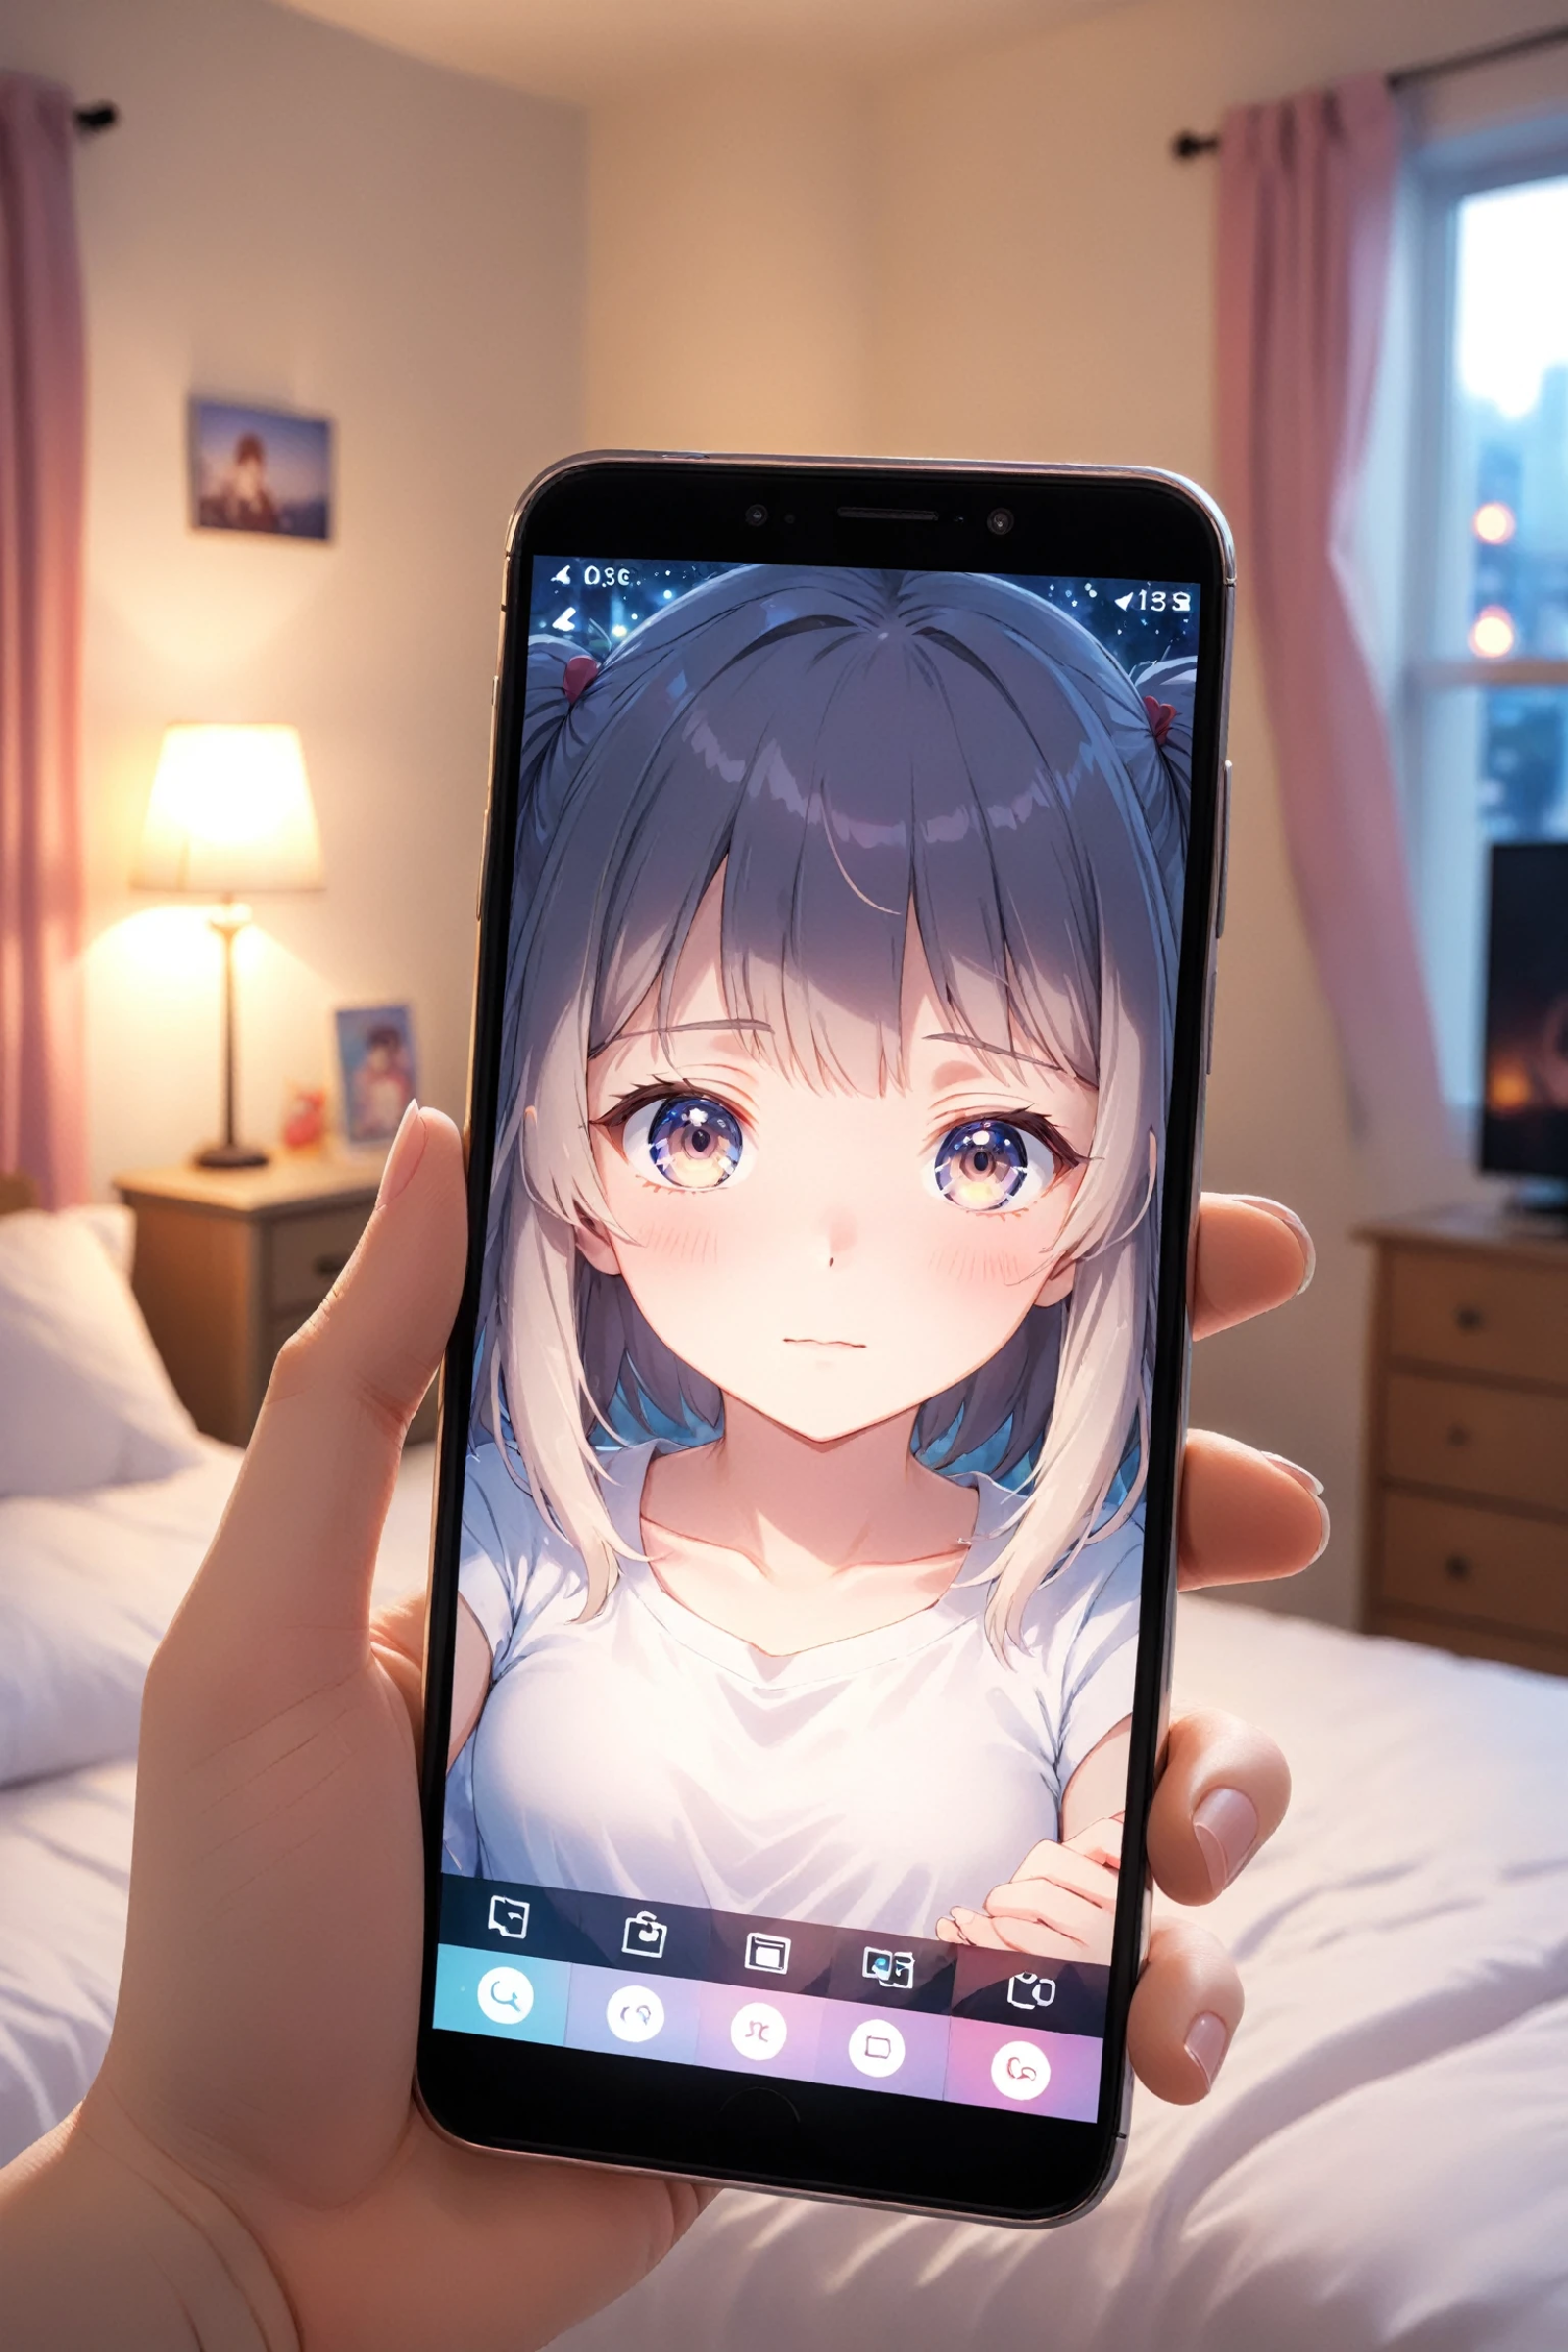 A person holding a cell phone with an anime character displayed on the screen.